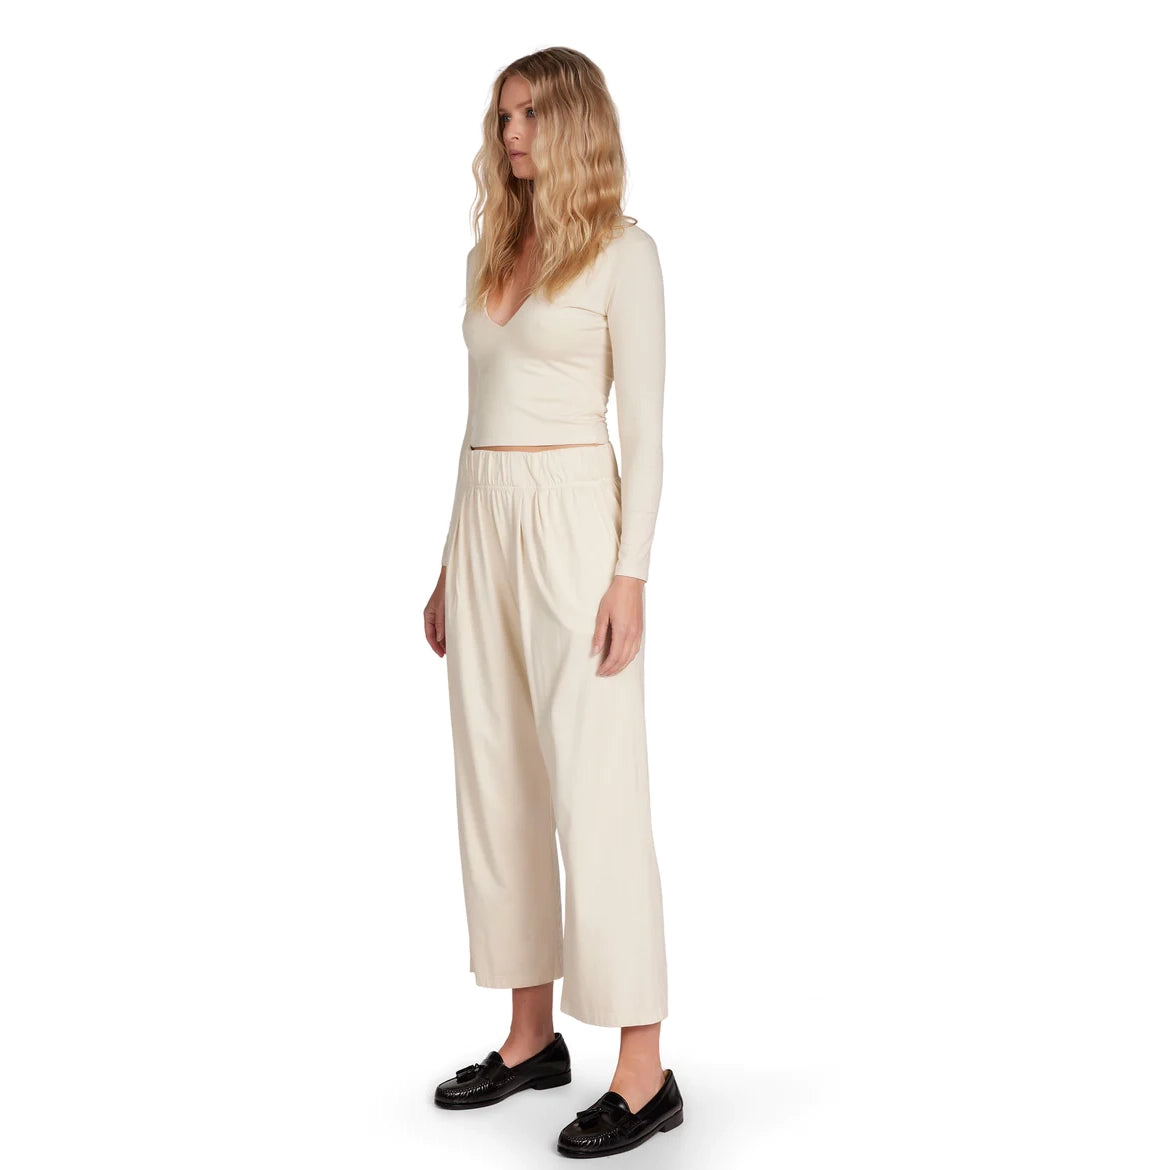 Penny Pleat Front Pant